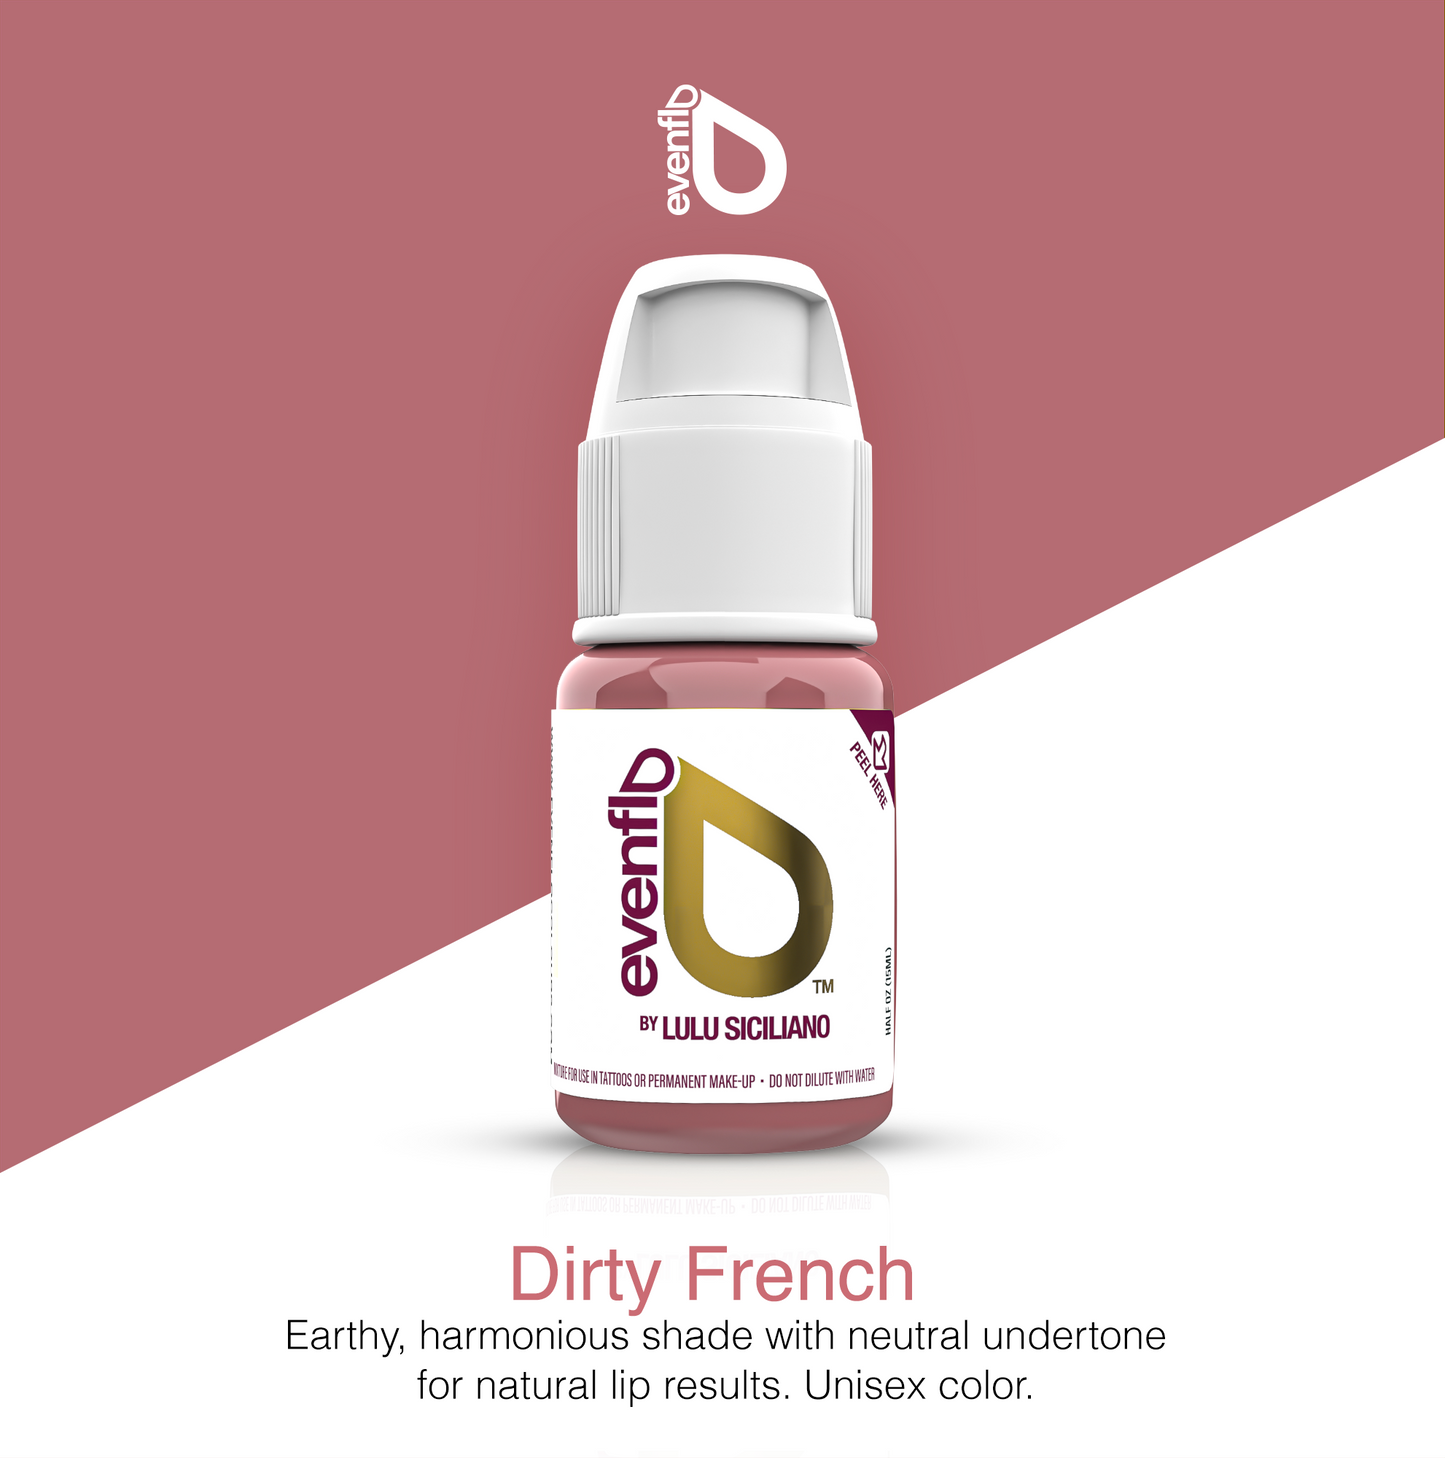 Evenflo Dirty French